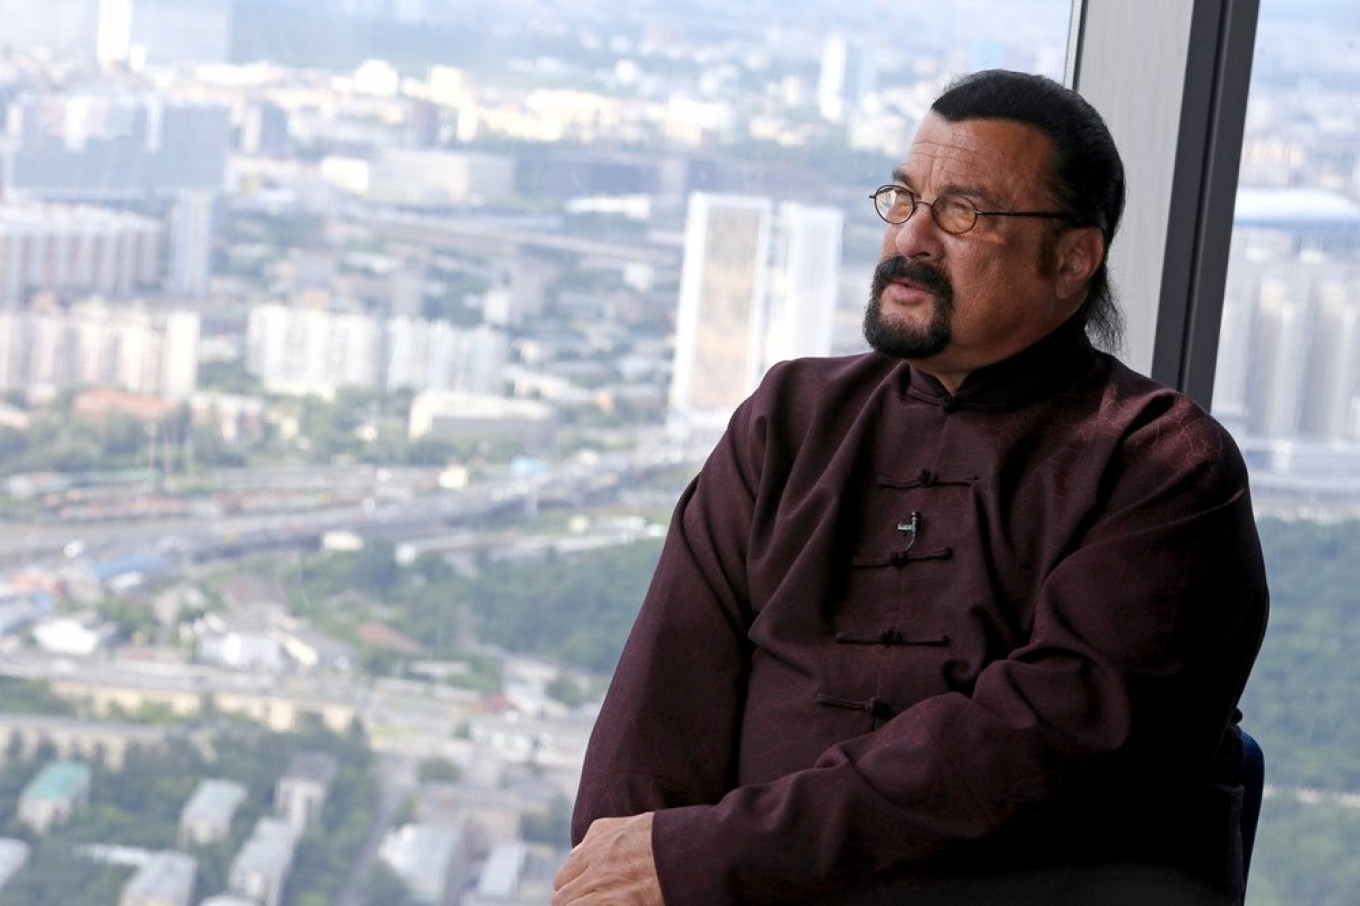 Steven Seagal : Charlize Theron Slams Steven Seagal As Overweight Not Very Nice To Women Page Six - Steven frederic seagal (born 1952 in michigan) is an actor, martial artist professional charlatan, musician, activist and aspiring politician, vegetarian, (alleged) habitual sex offender, apologist for dictators, and the biggest jerk to ever host snl.